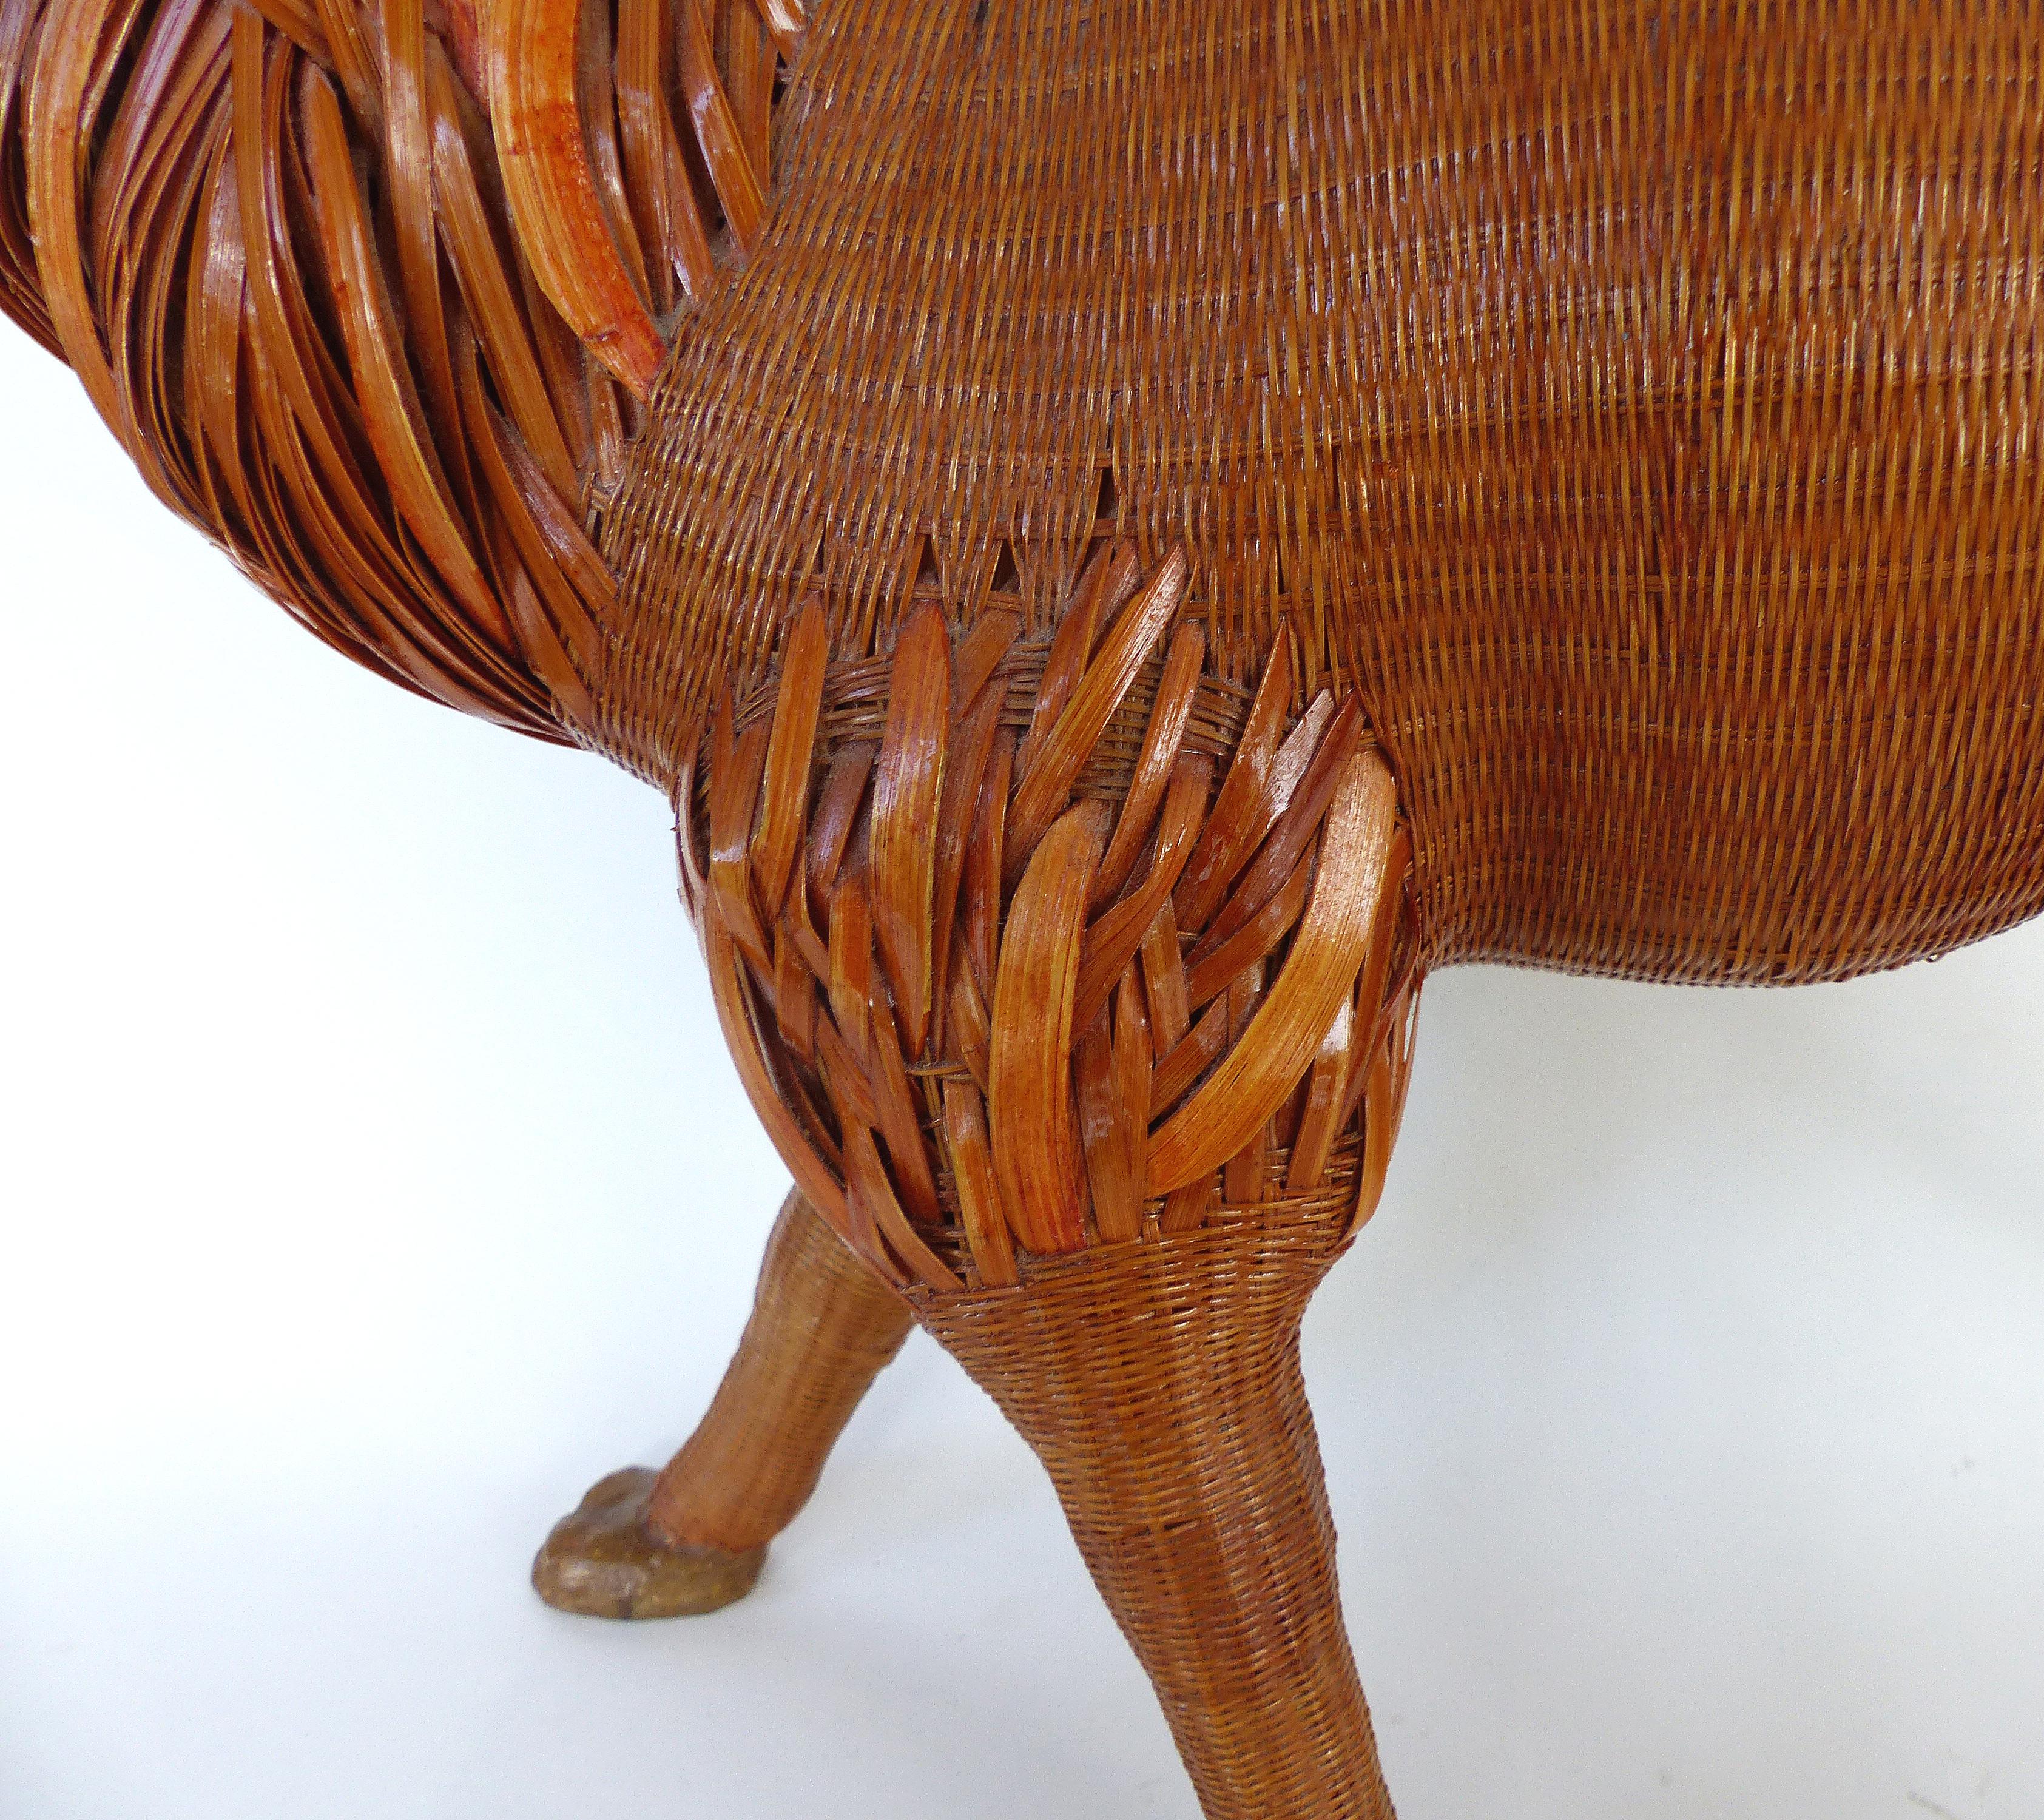 Late 20th Century Chinese Woven Reed Sculpture of a Camel from the Shanghai Collection